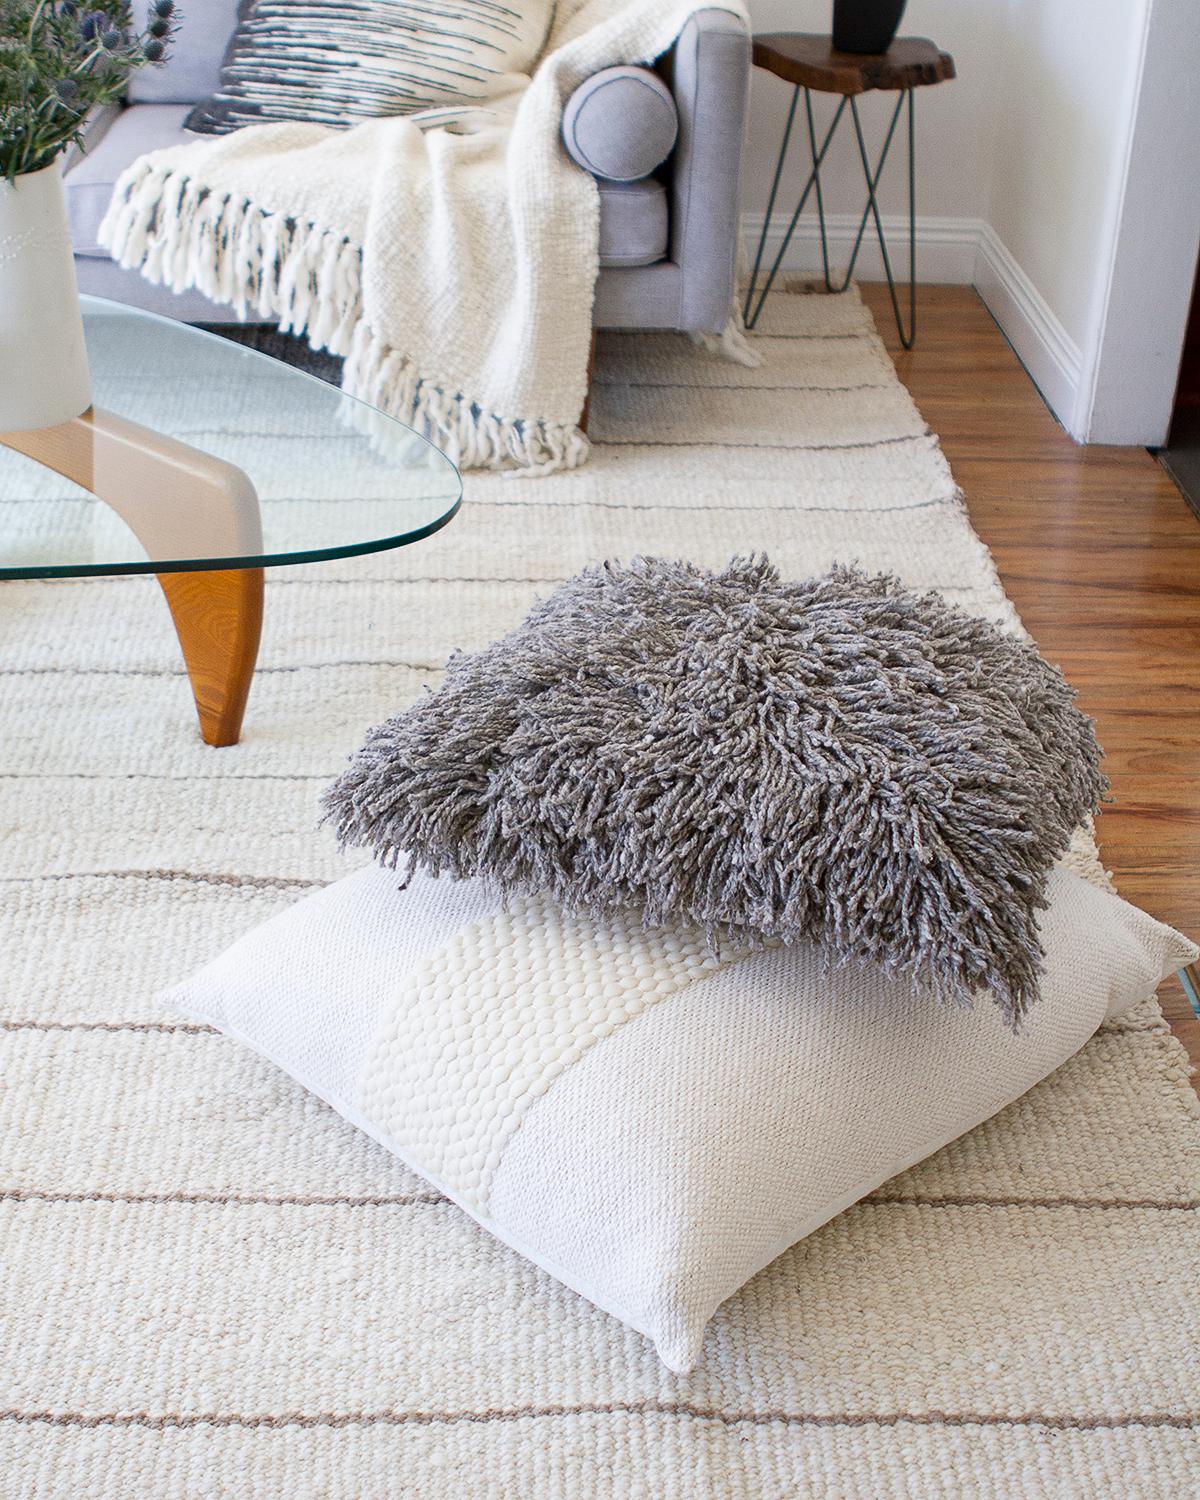 A shaggy pillow to brighten your living room. Introducing Awanay Sur Pillows - our wildly fun, handmade wool pillows with a playful twist. Fair trade and totally boho, these shag pillows are the perfect addition to any home decor! Superbly gray and